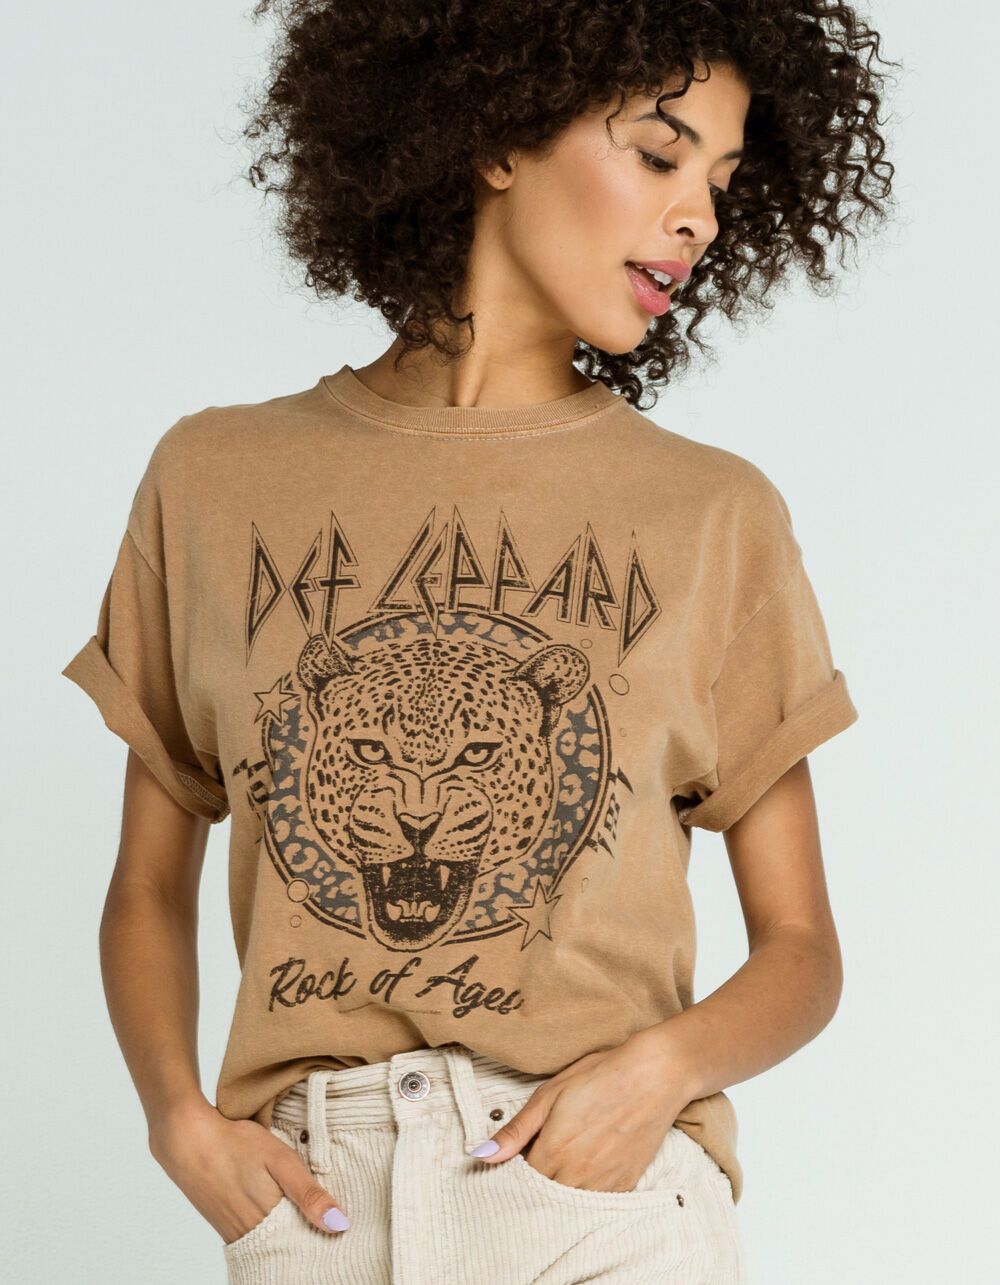 VINYL ICONS Def Leppard Rock Of Ages Womens Tee - CAMEL - TL2850DF | Tillys